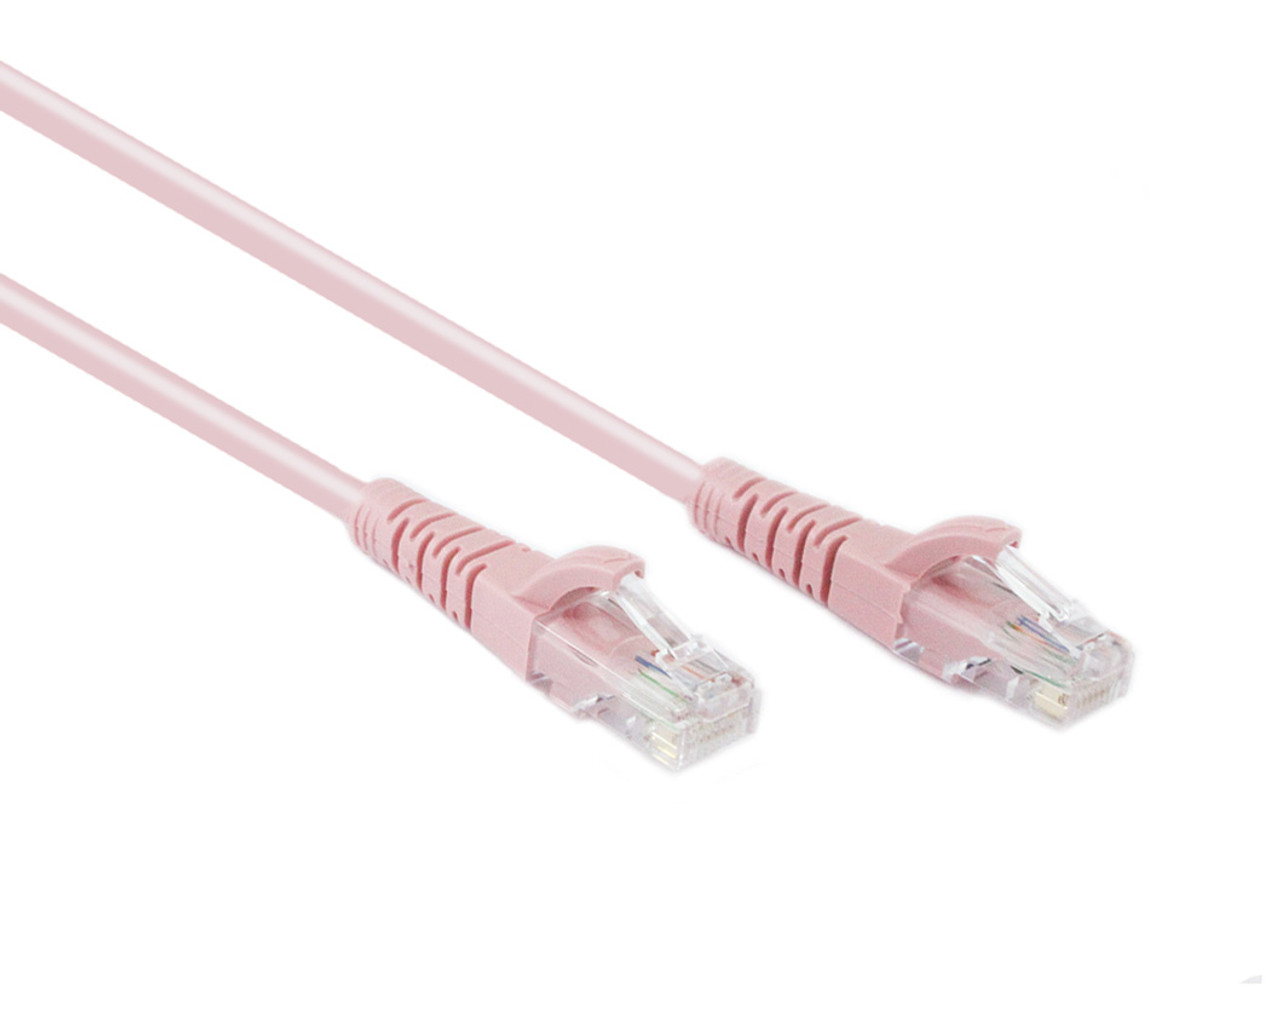 10M Pink Cat5E UTP Cable